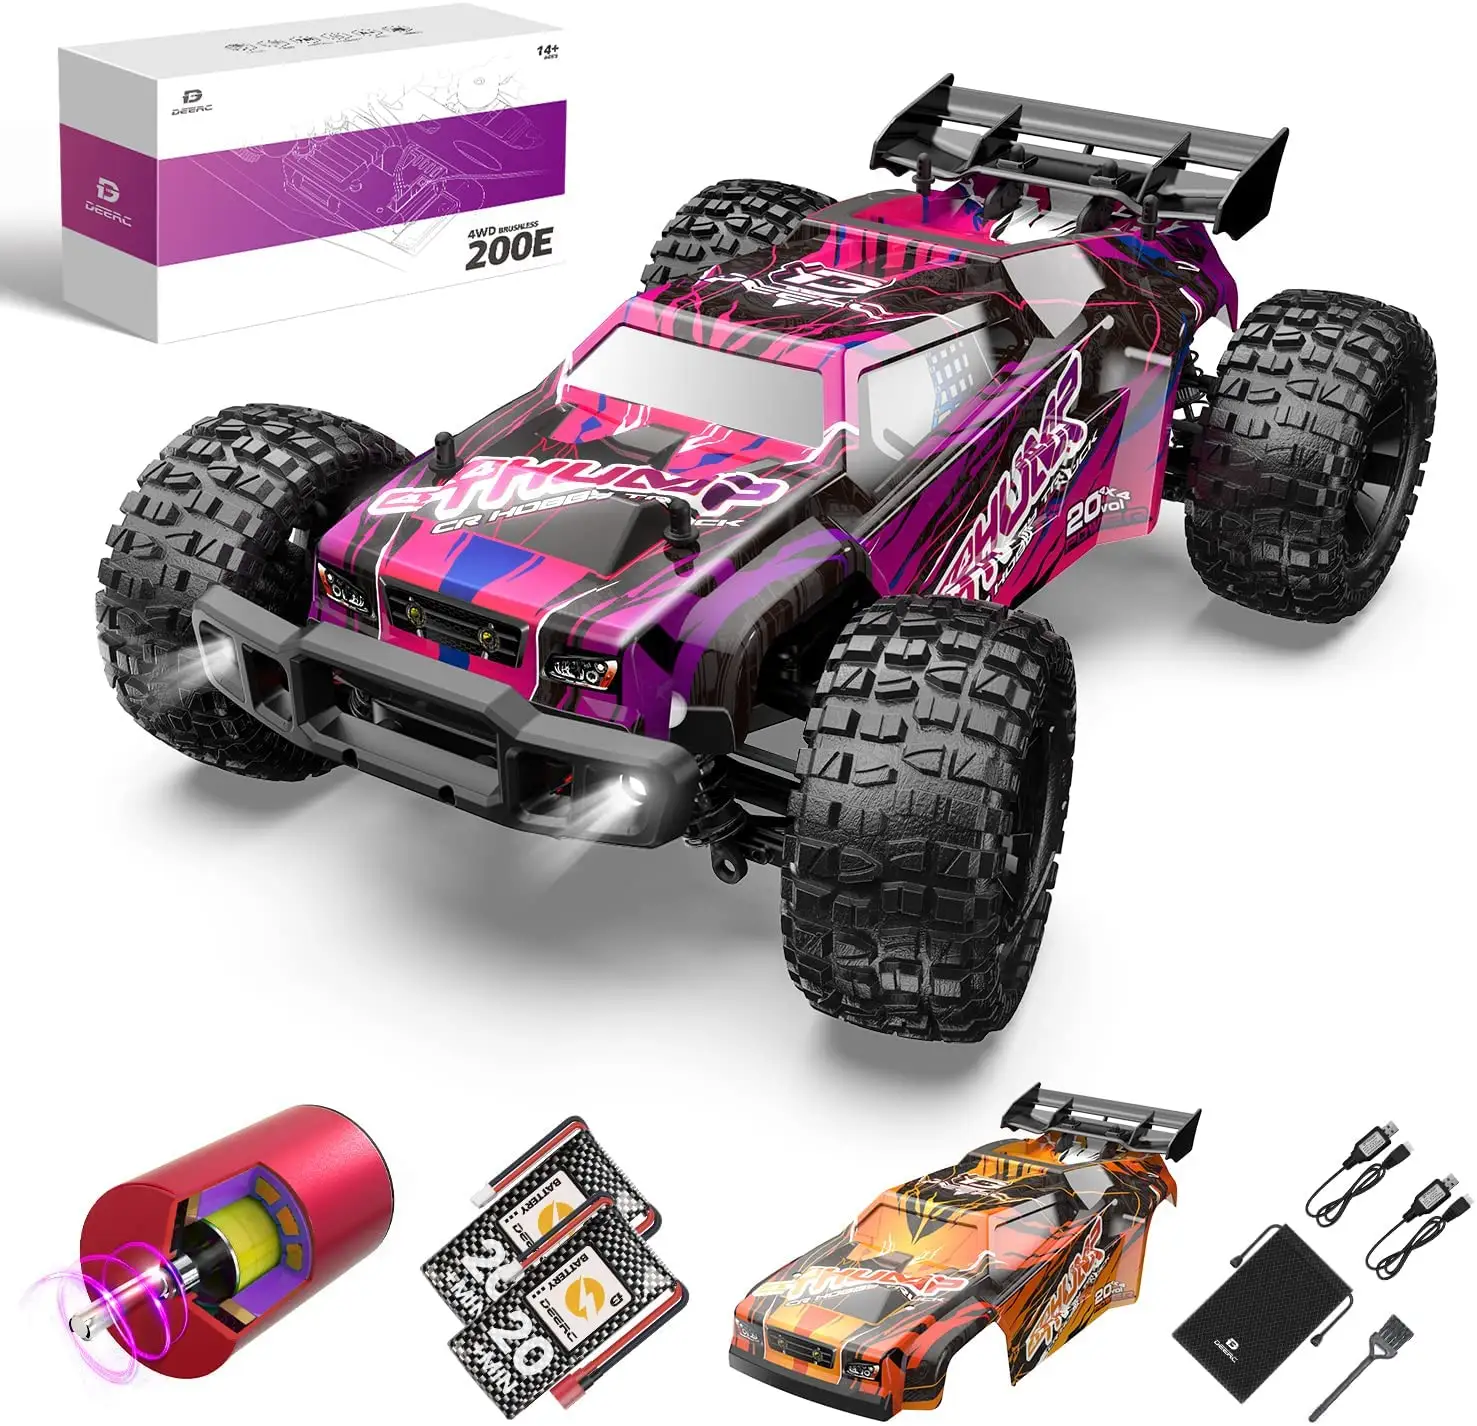 DEERC 200E Upgraded 1/10 Scale 65 KM/H Ultra High Speed Remote Control Car Dual Shells Brushless Hobby Grade RC Car